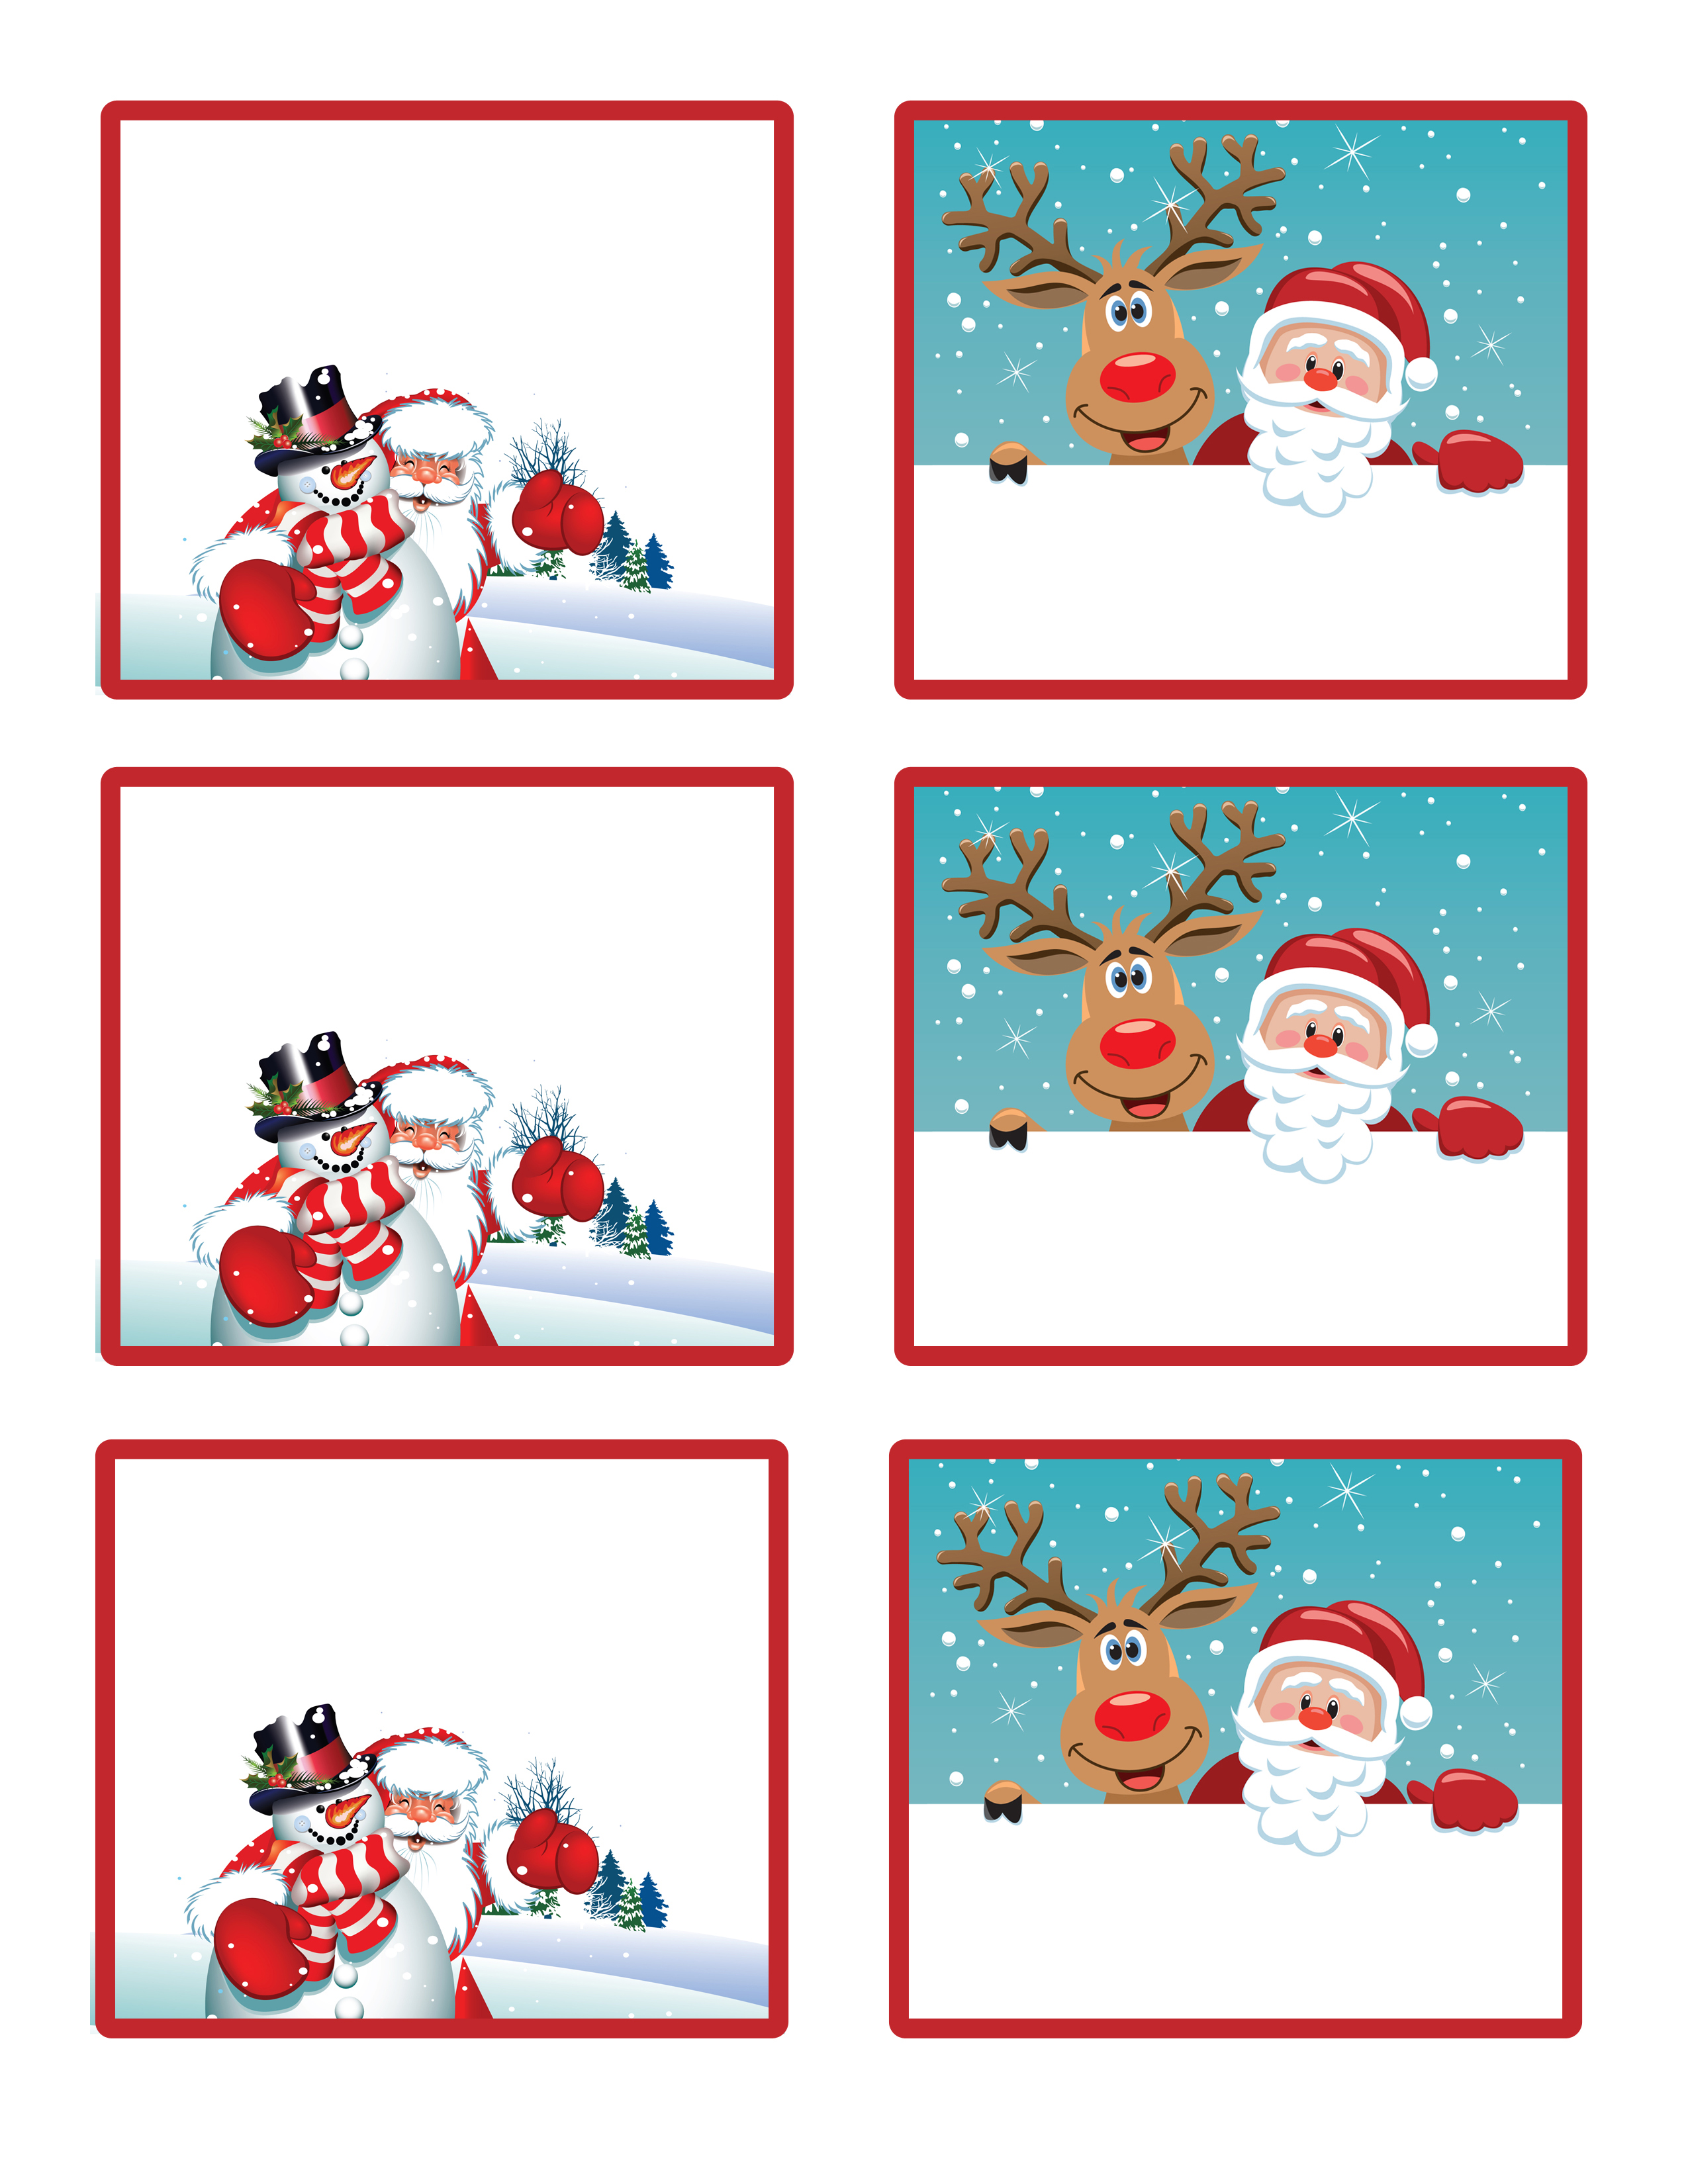 Santa's little gift to you! Free Printable Gift Tags and Labels